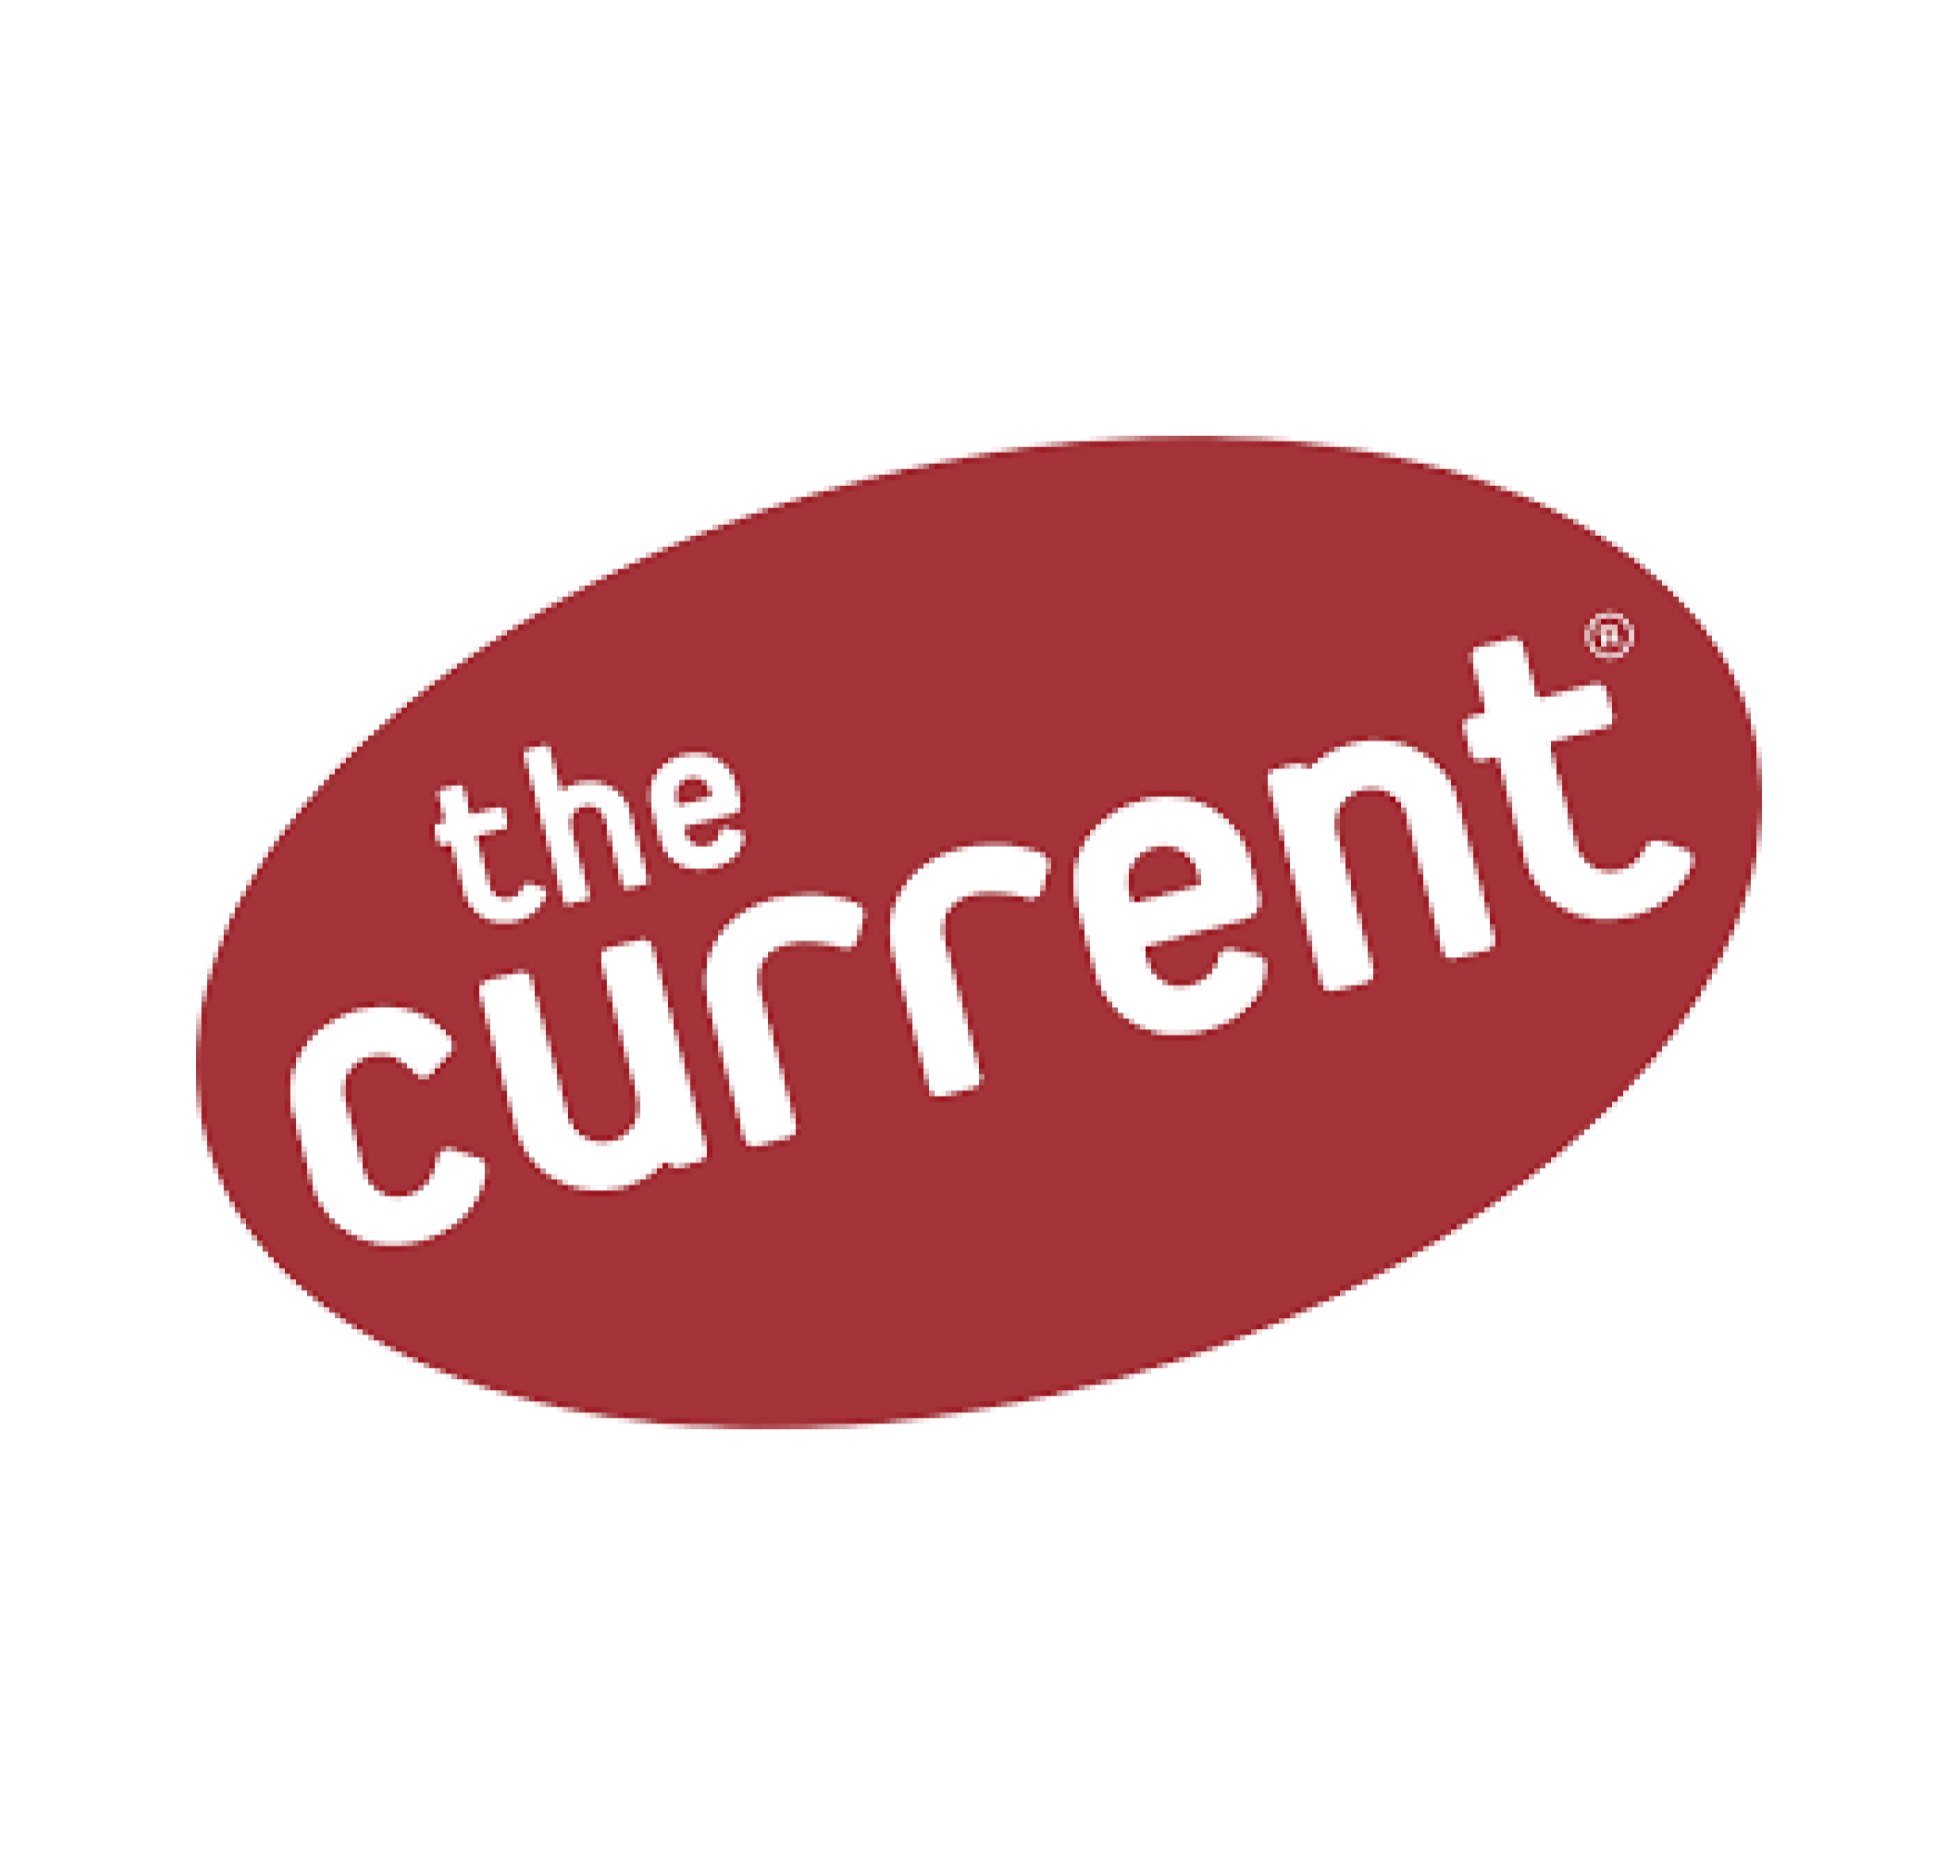 The current